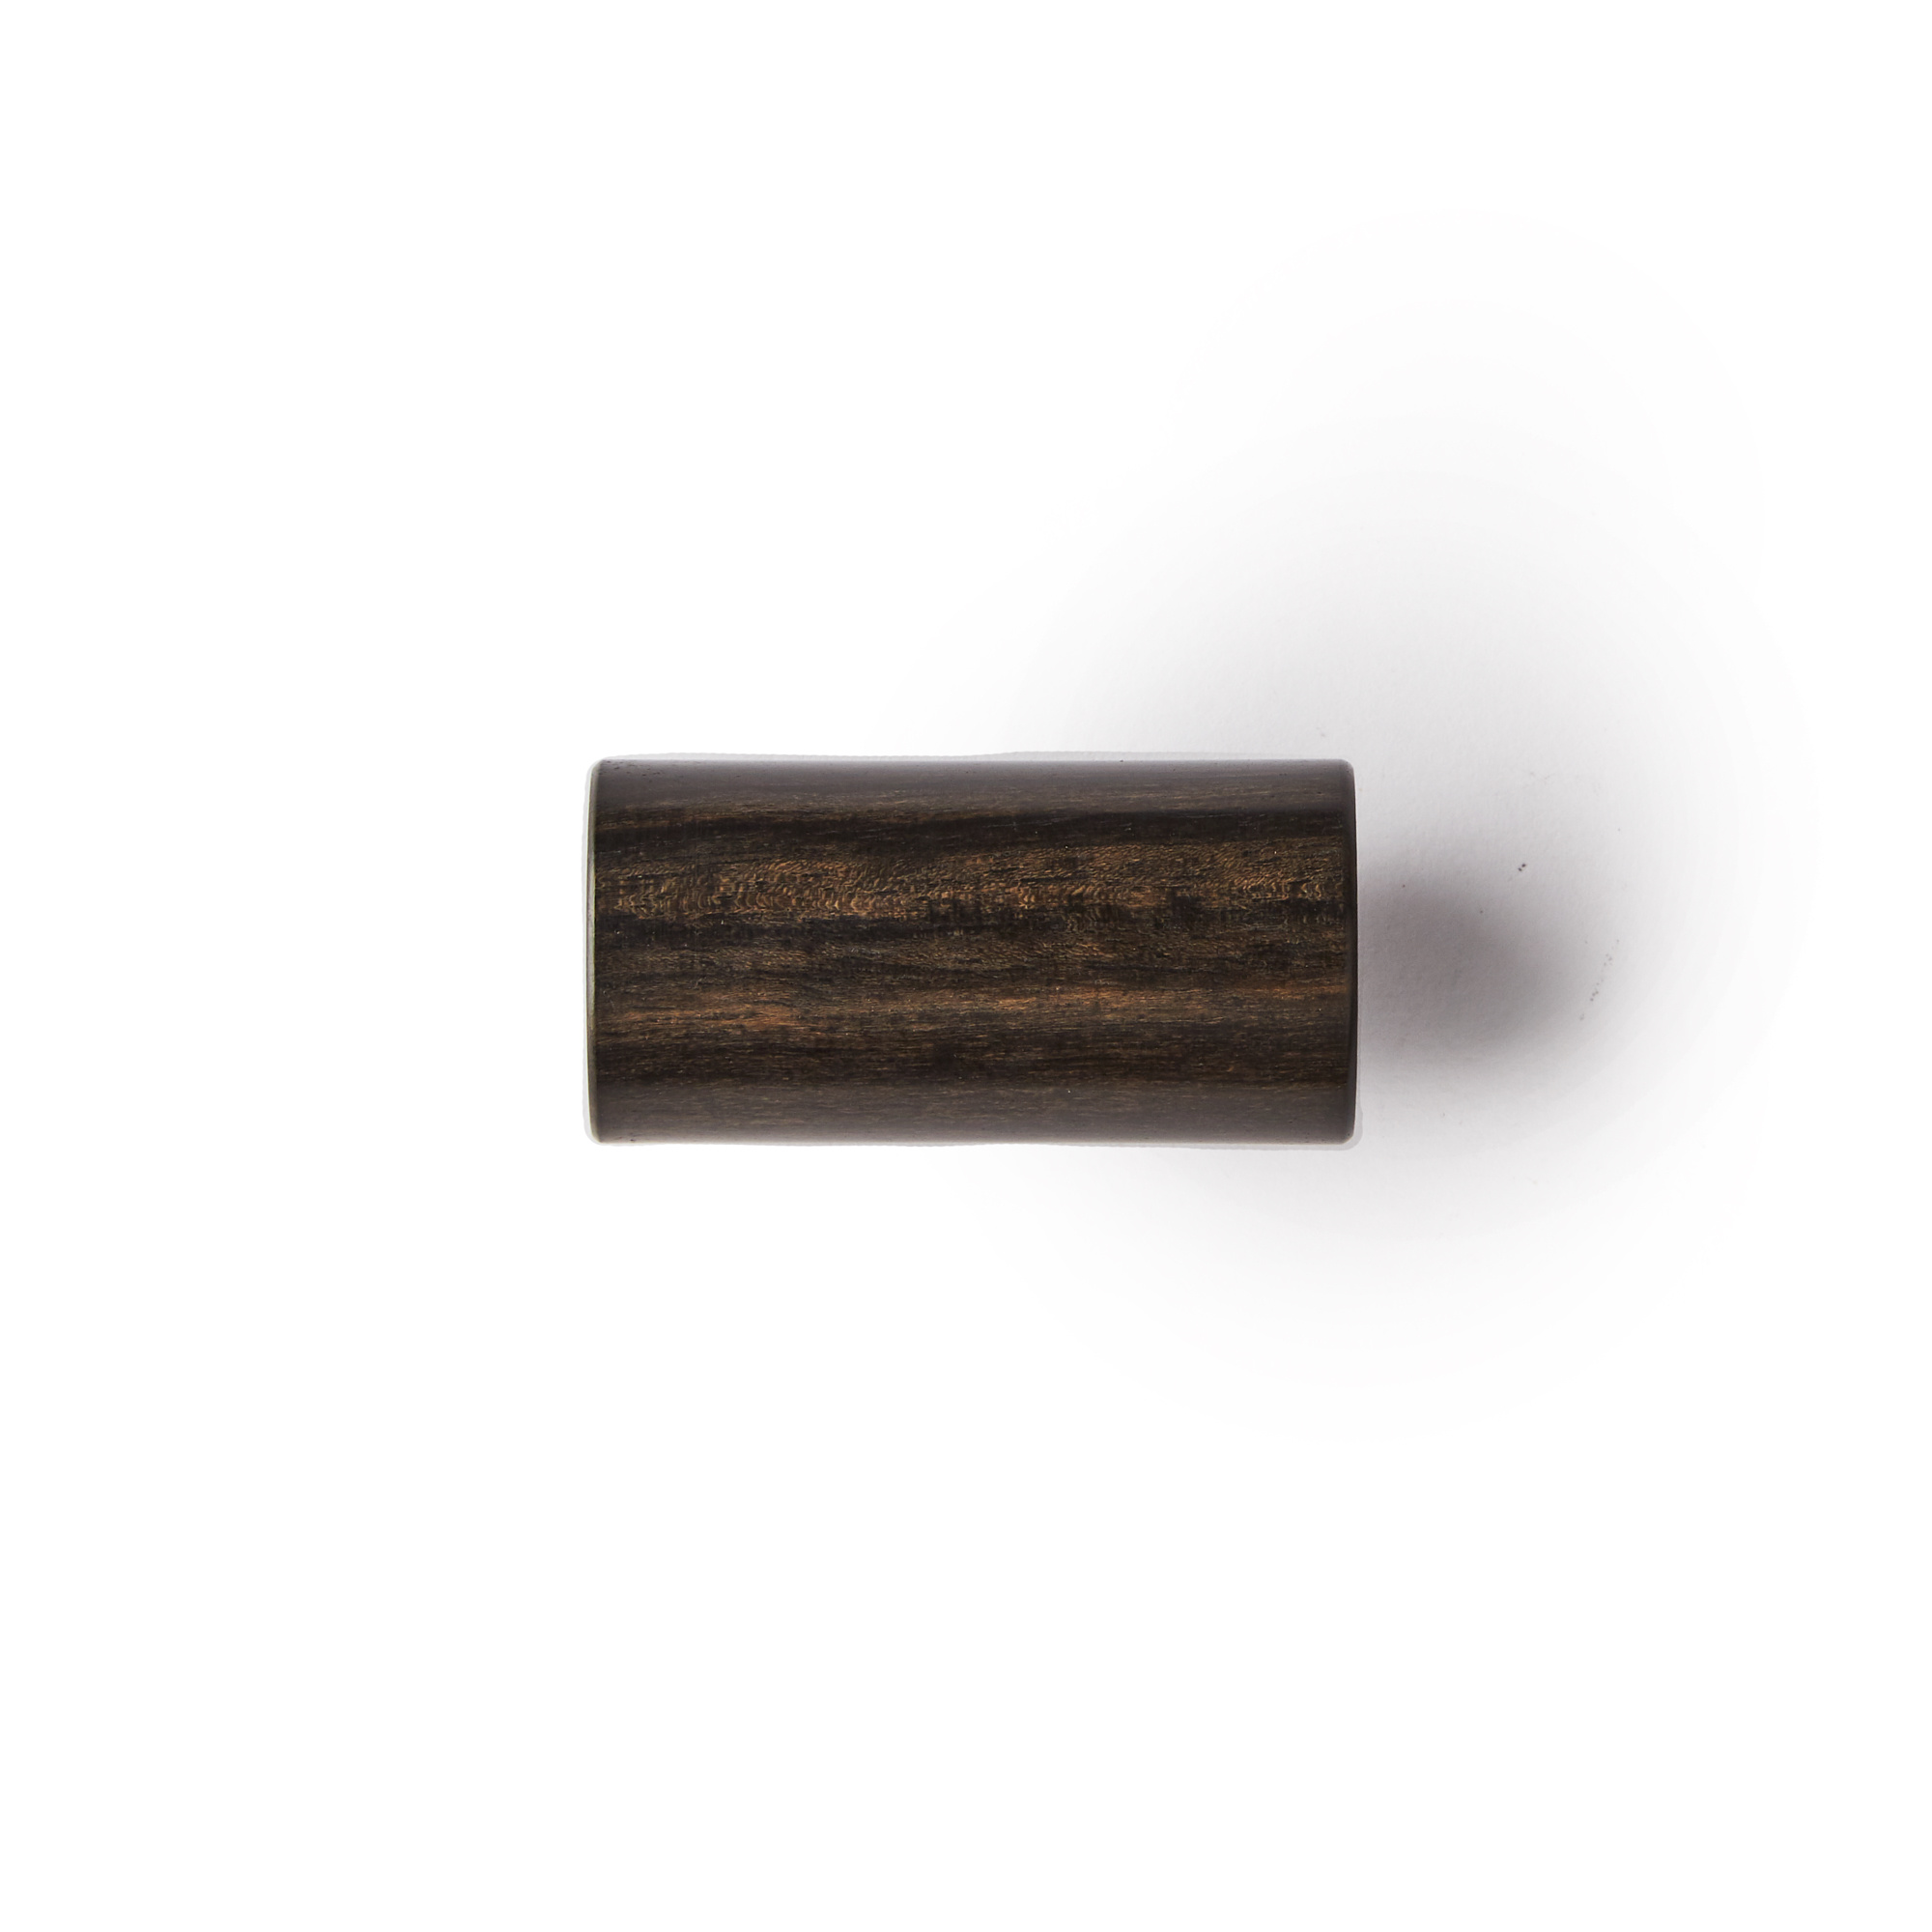 An image of Taylor Large 13/16 African Ebony Guitar Slide